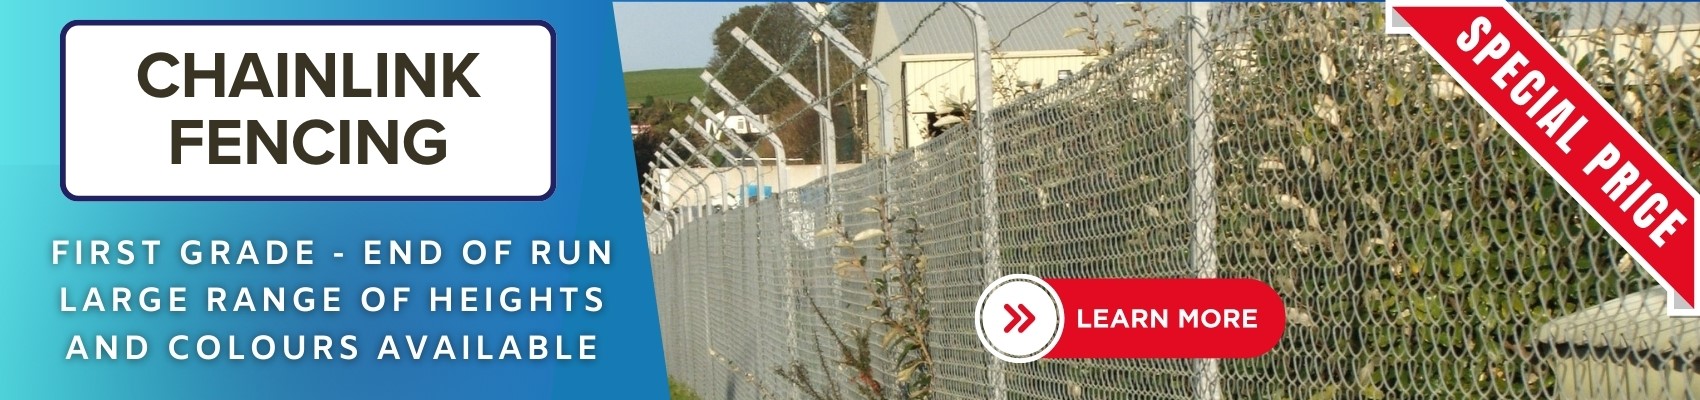 Chainlink Fencing Special Offer